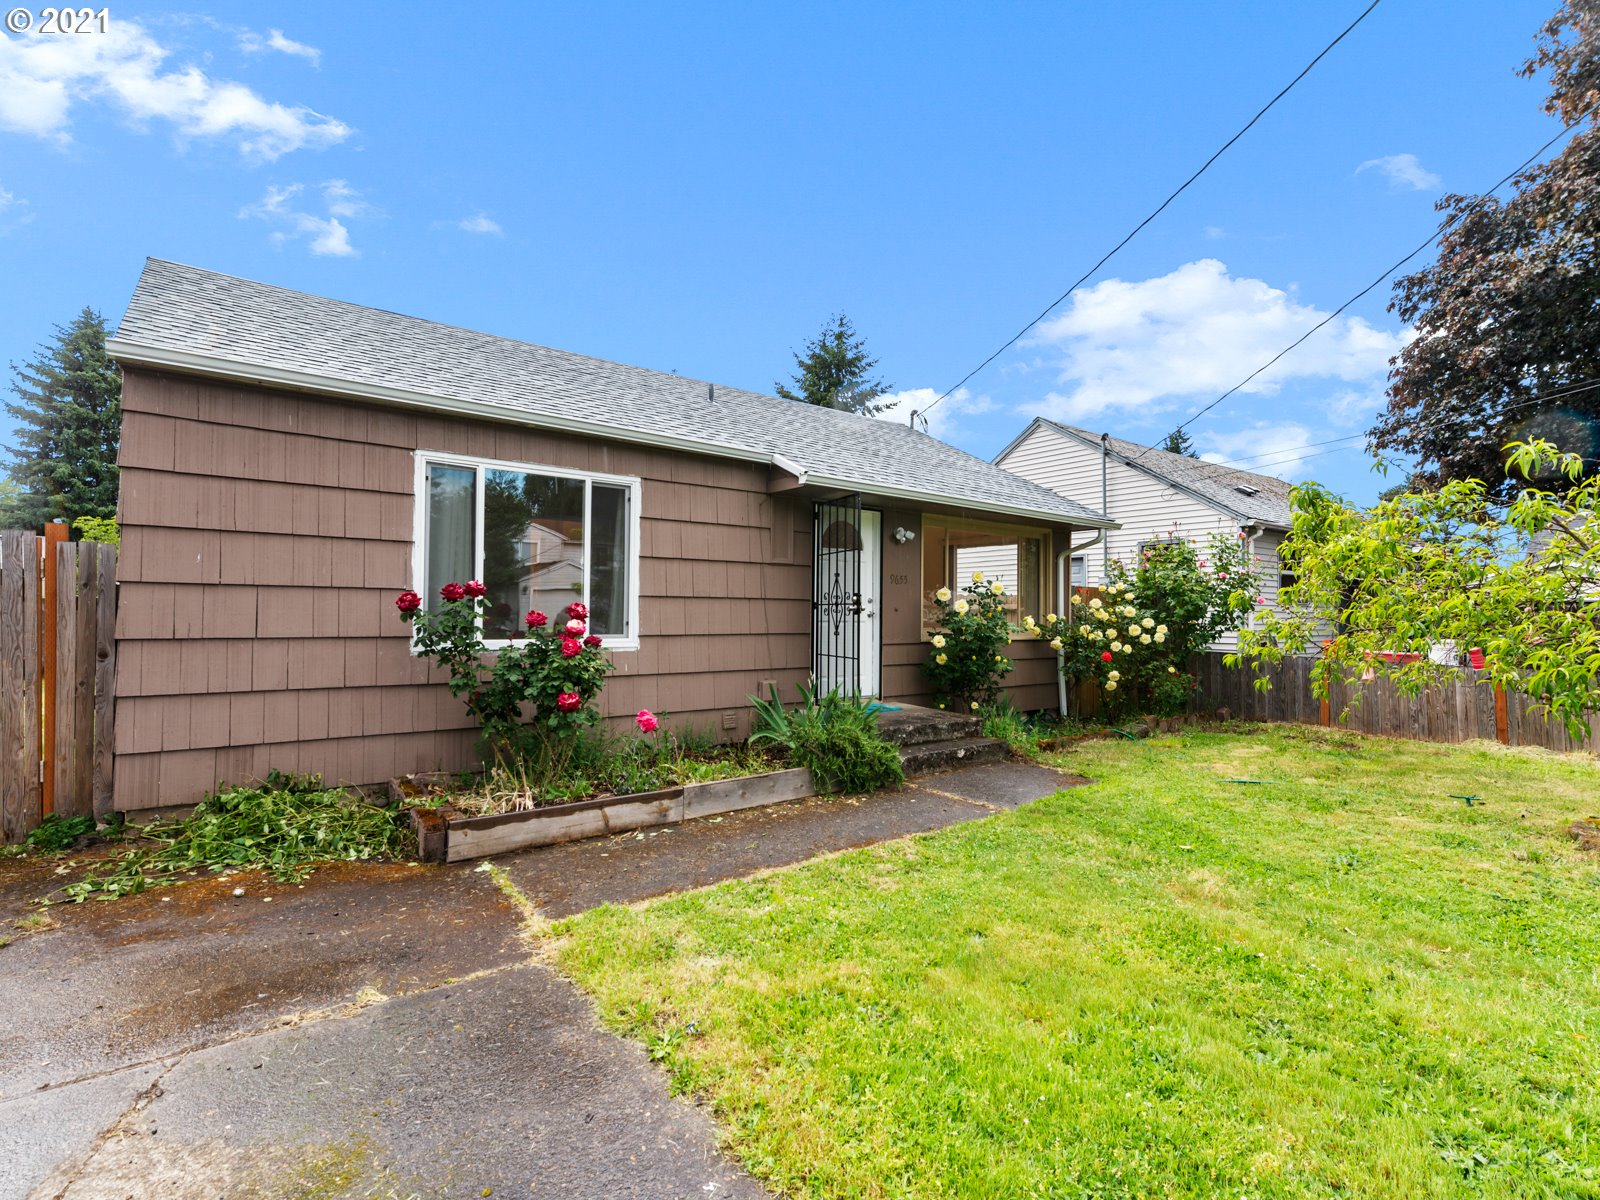 9655 SE 78TH AVE (1 of 23)